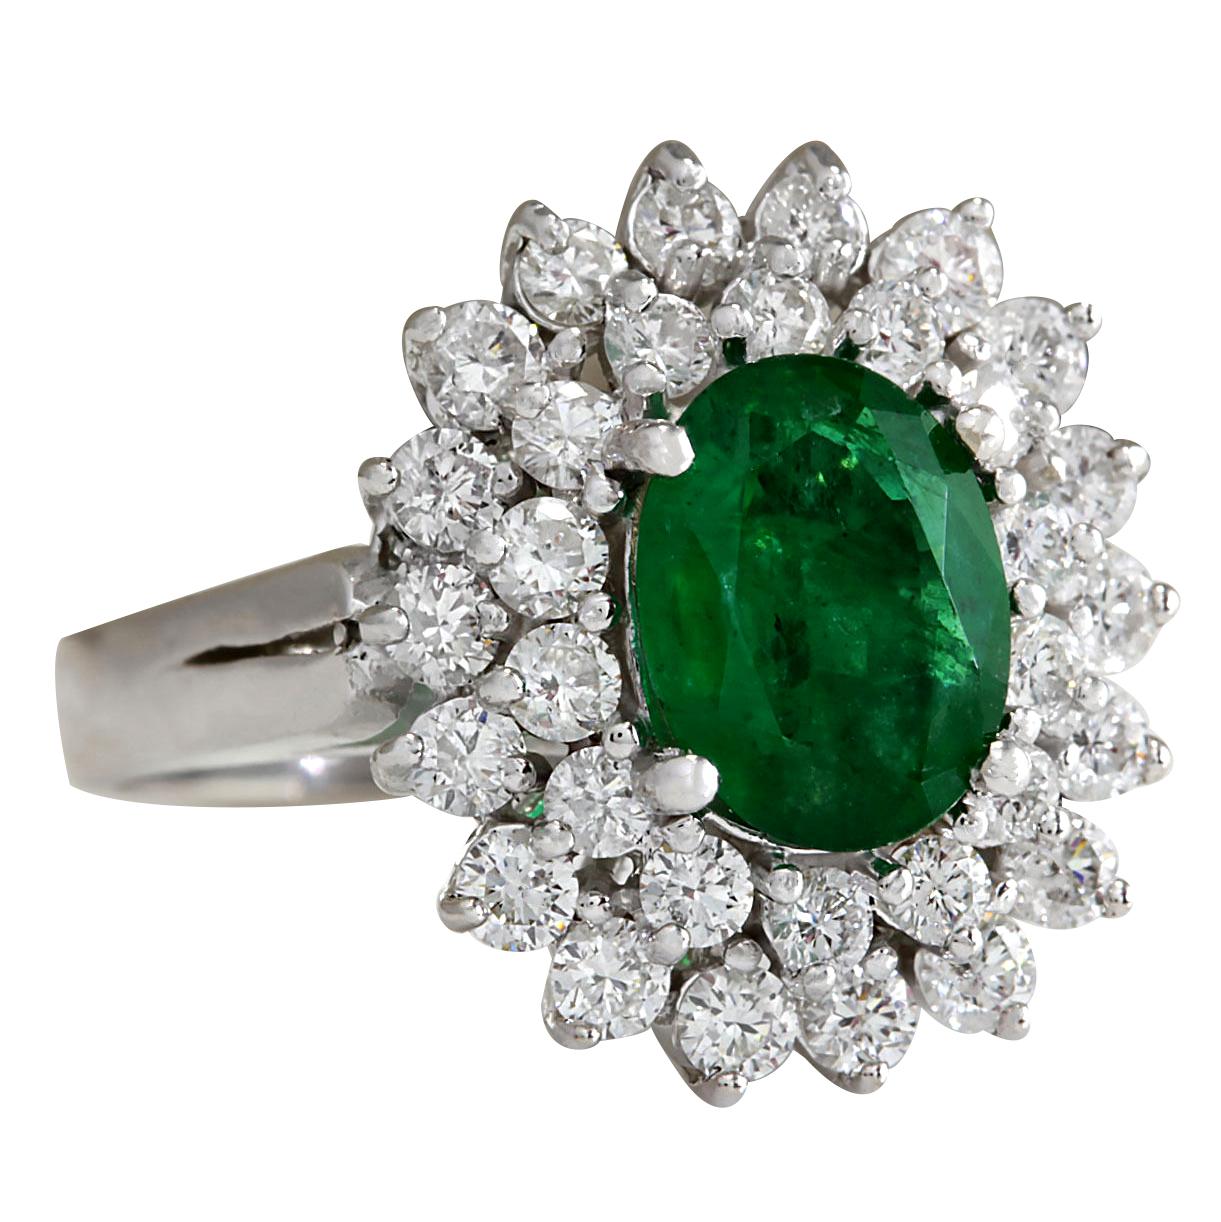 Stamped: 18K White Gold
Total Ring Weight: 6.3 Grams
Ring Length: N/A
Ring Width: N/A
Gemstone Weight: Total Natural Emerald Weight is 1.50 Carat (Measures: 9.06x7.01 mm)
Color: Green
Diamond Weight: Total Natural Diamond Weight is 1.25 Carat
Color: